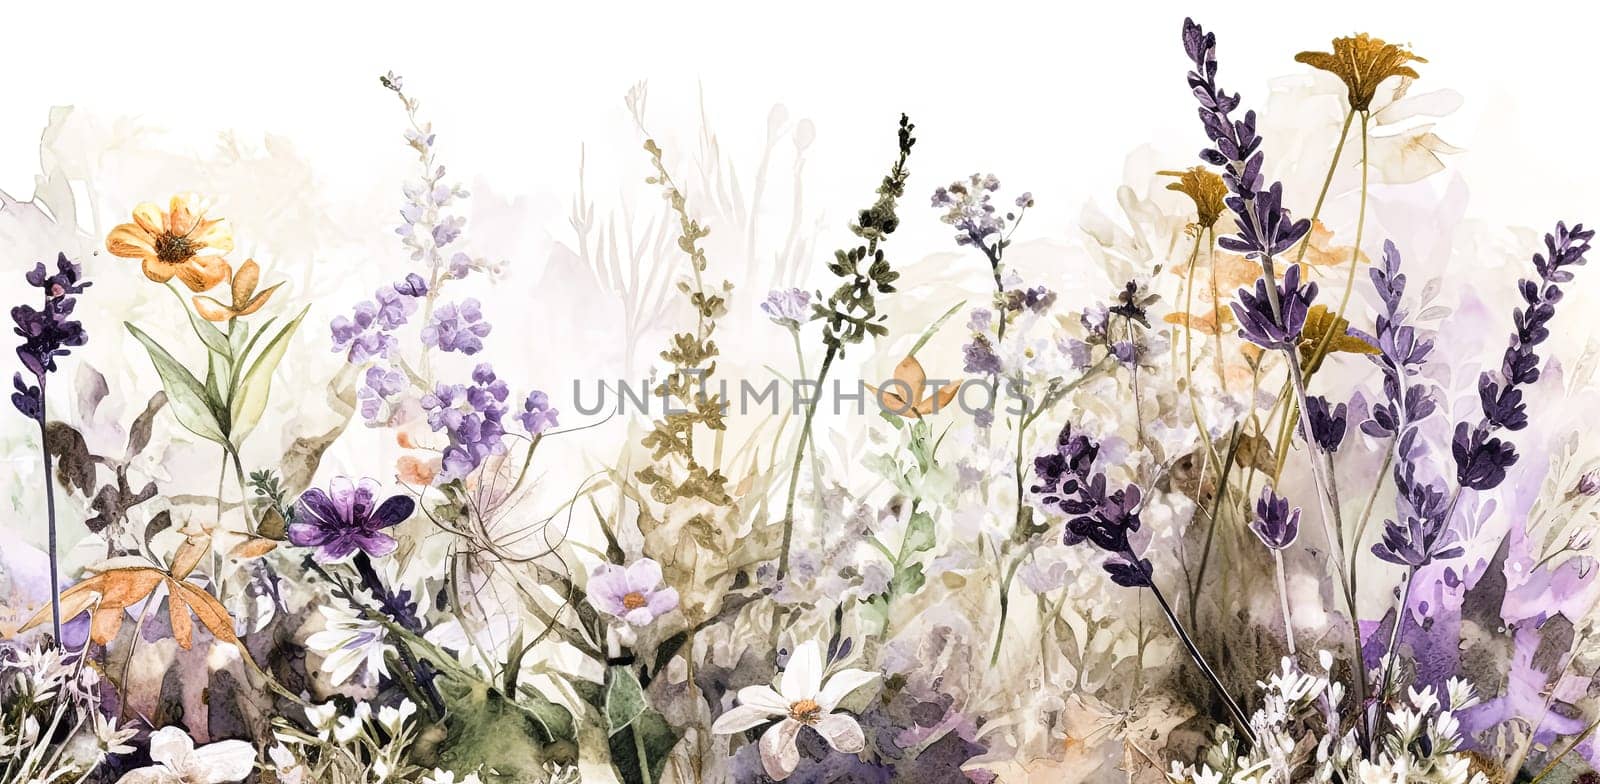 Watercolor bouquet collection of wild field herbs, flowers, and plants. Illustration features green leaves, branches, and colorful buds. Ideal for wedding stationery, wallpapers and prints.